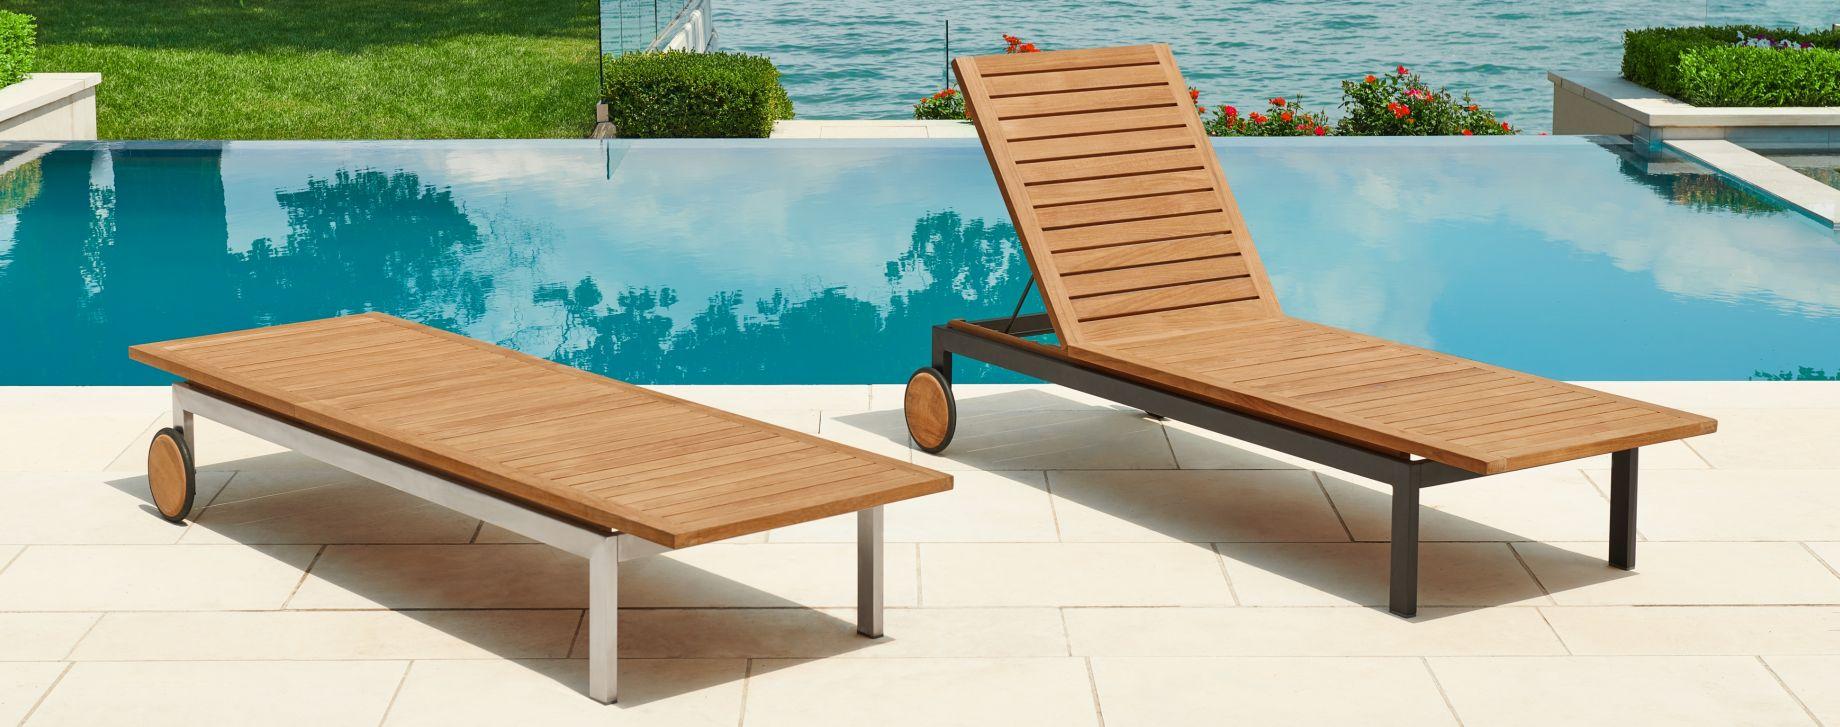 chaise loungers